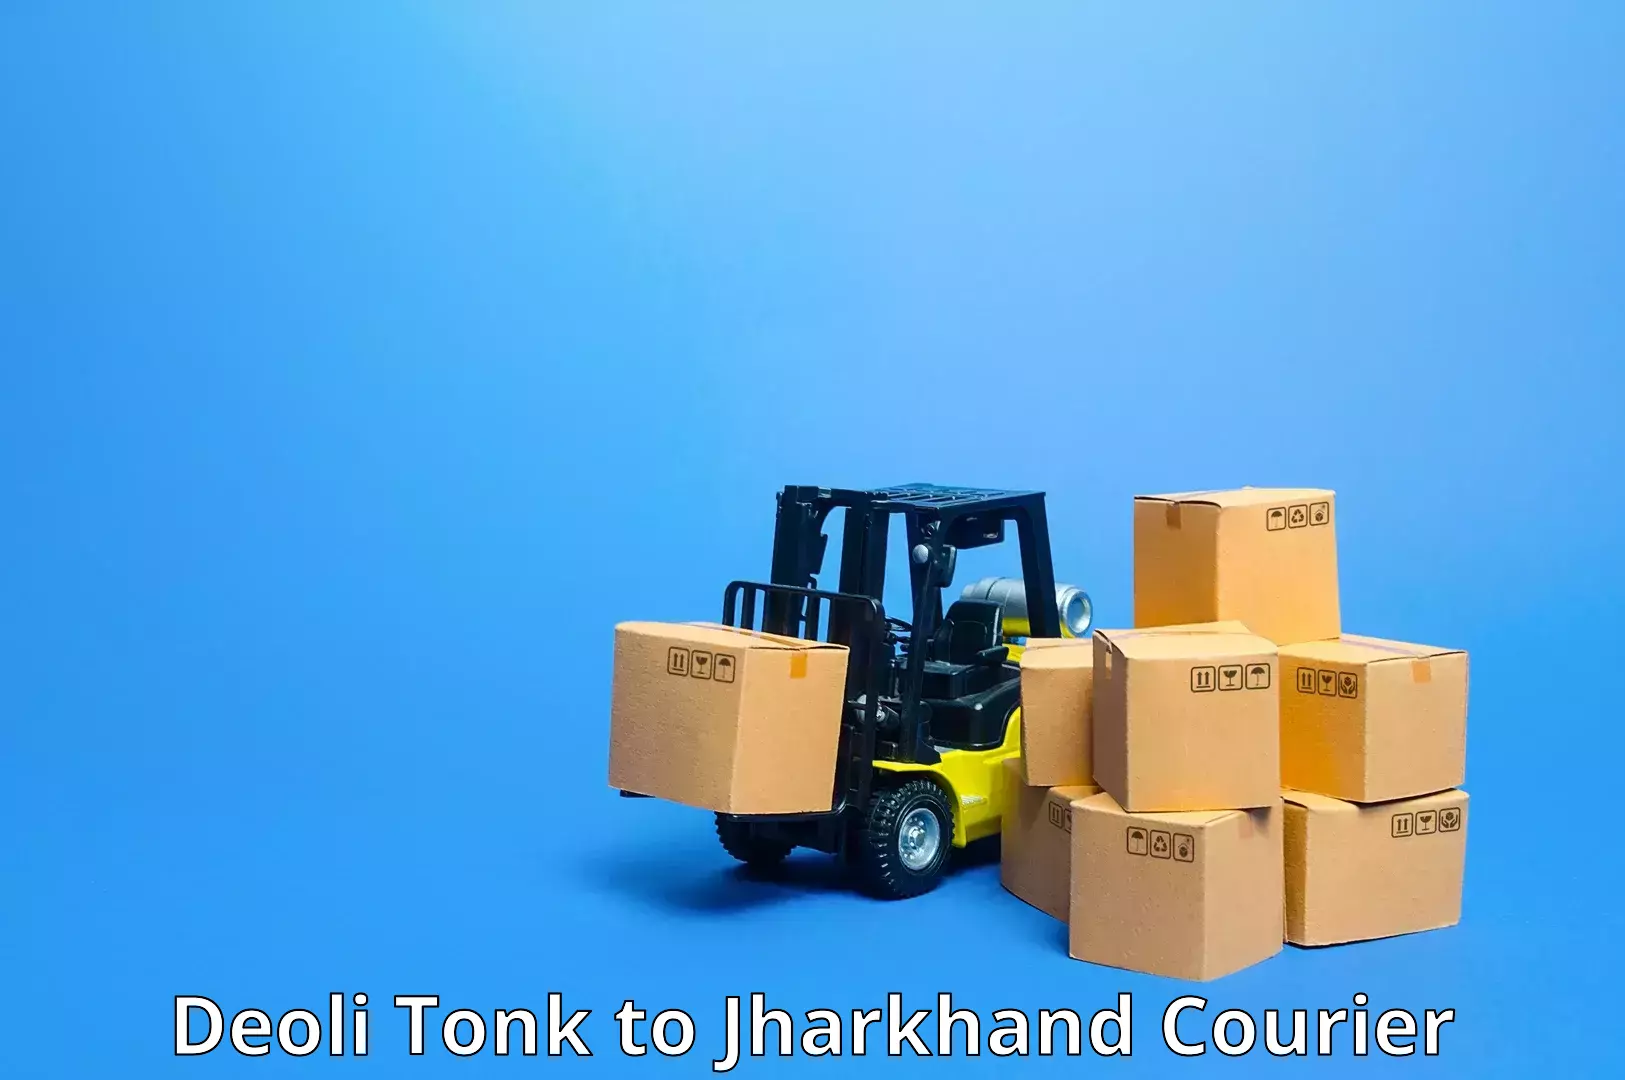 Express package services Deoli Tonk to Jharkhand